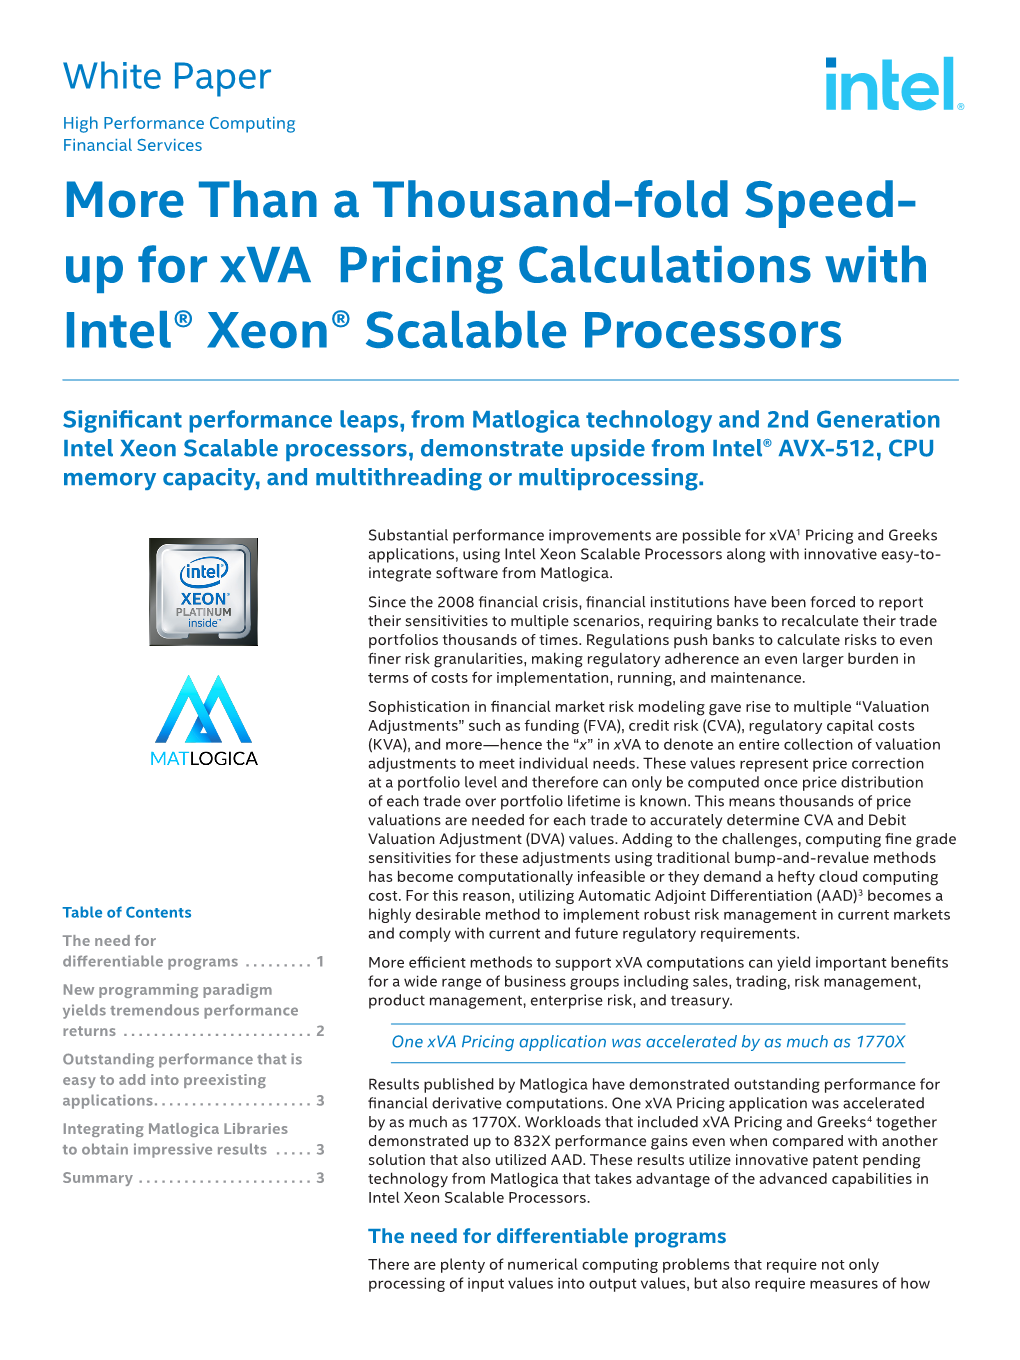 More Than a Thousand-Fold Speed- up for Xva Pricing Calculations with Intel® Xeon® Scalable Processors